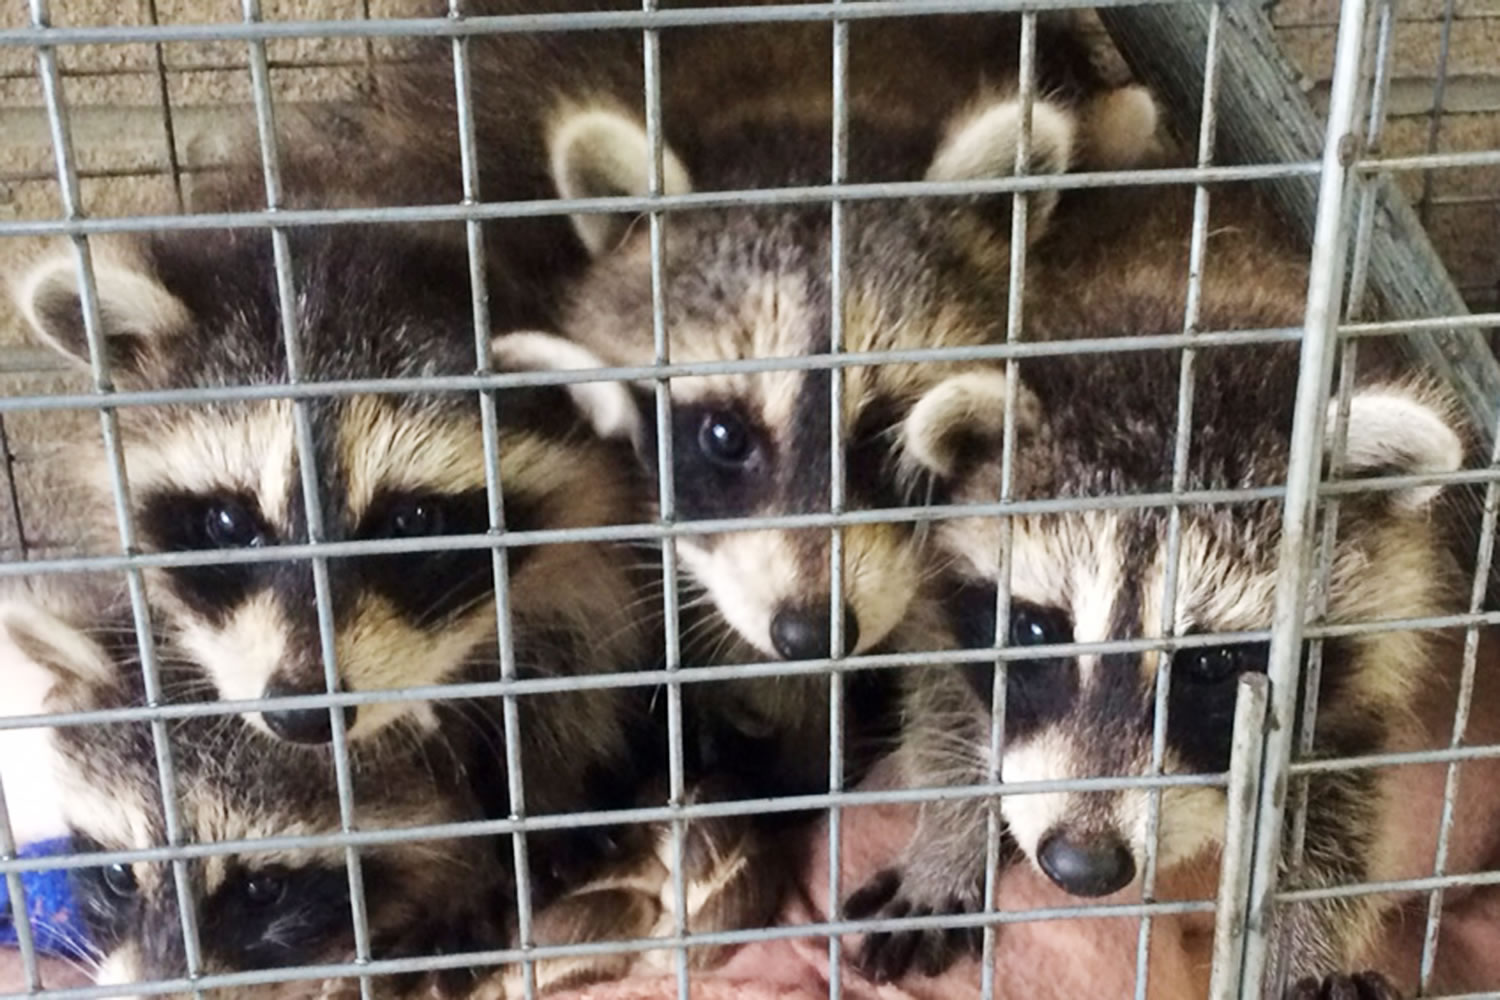 Three young raccoons were left at the doorstep Friday of the Westchester County Department of Health's office in New Rochelle, N.Y.